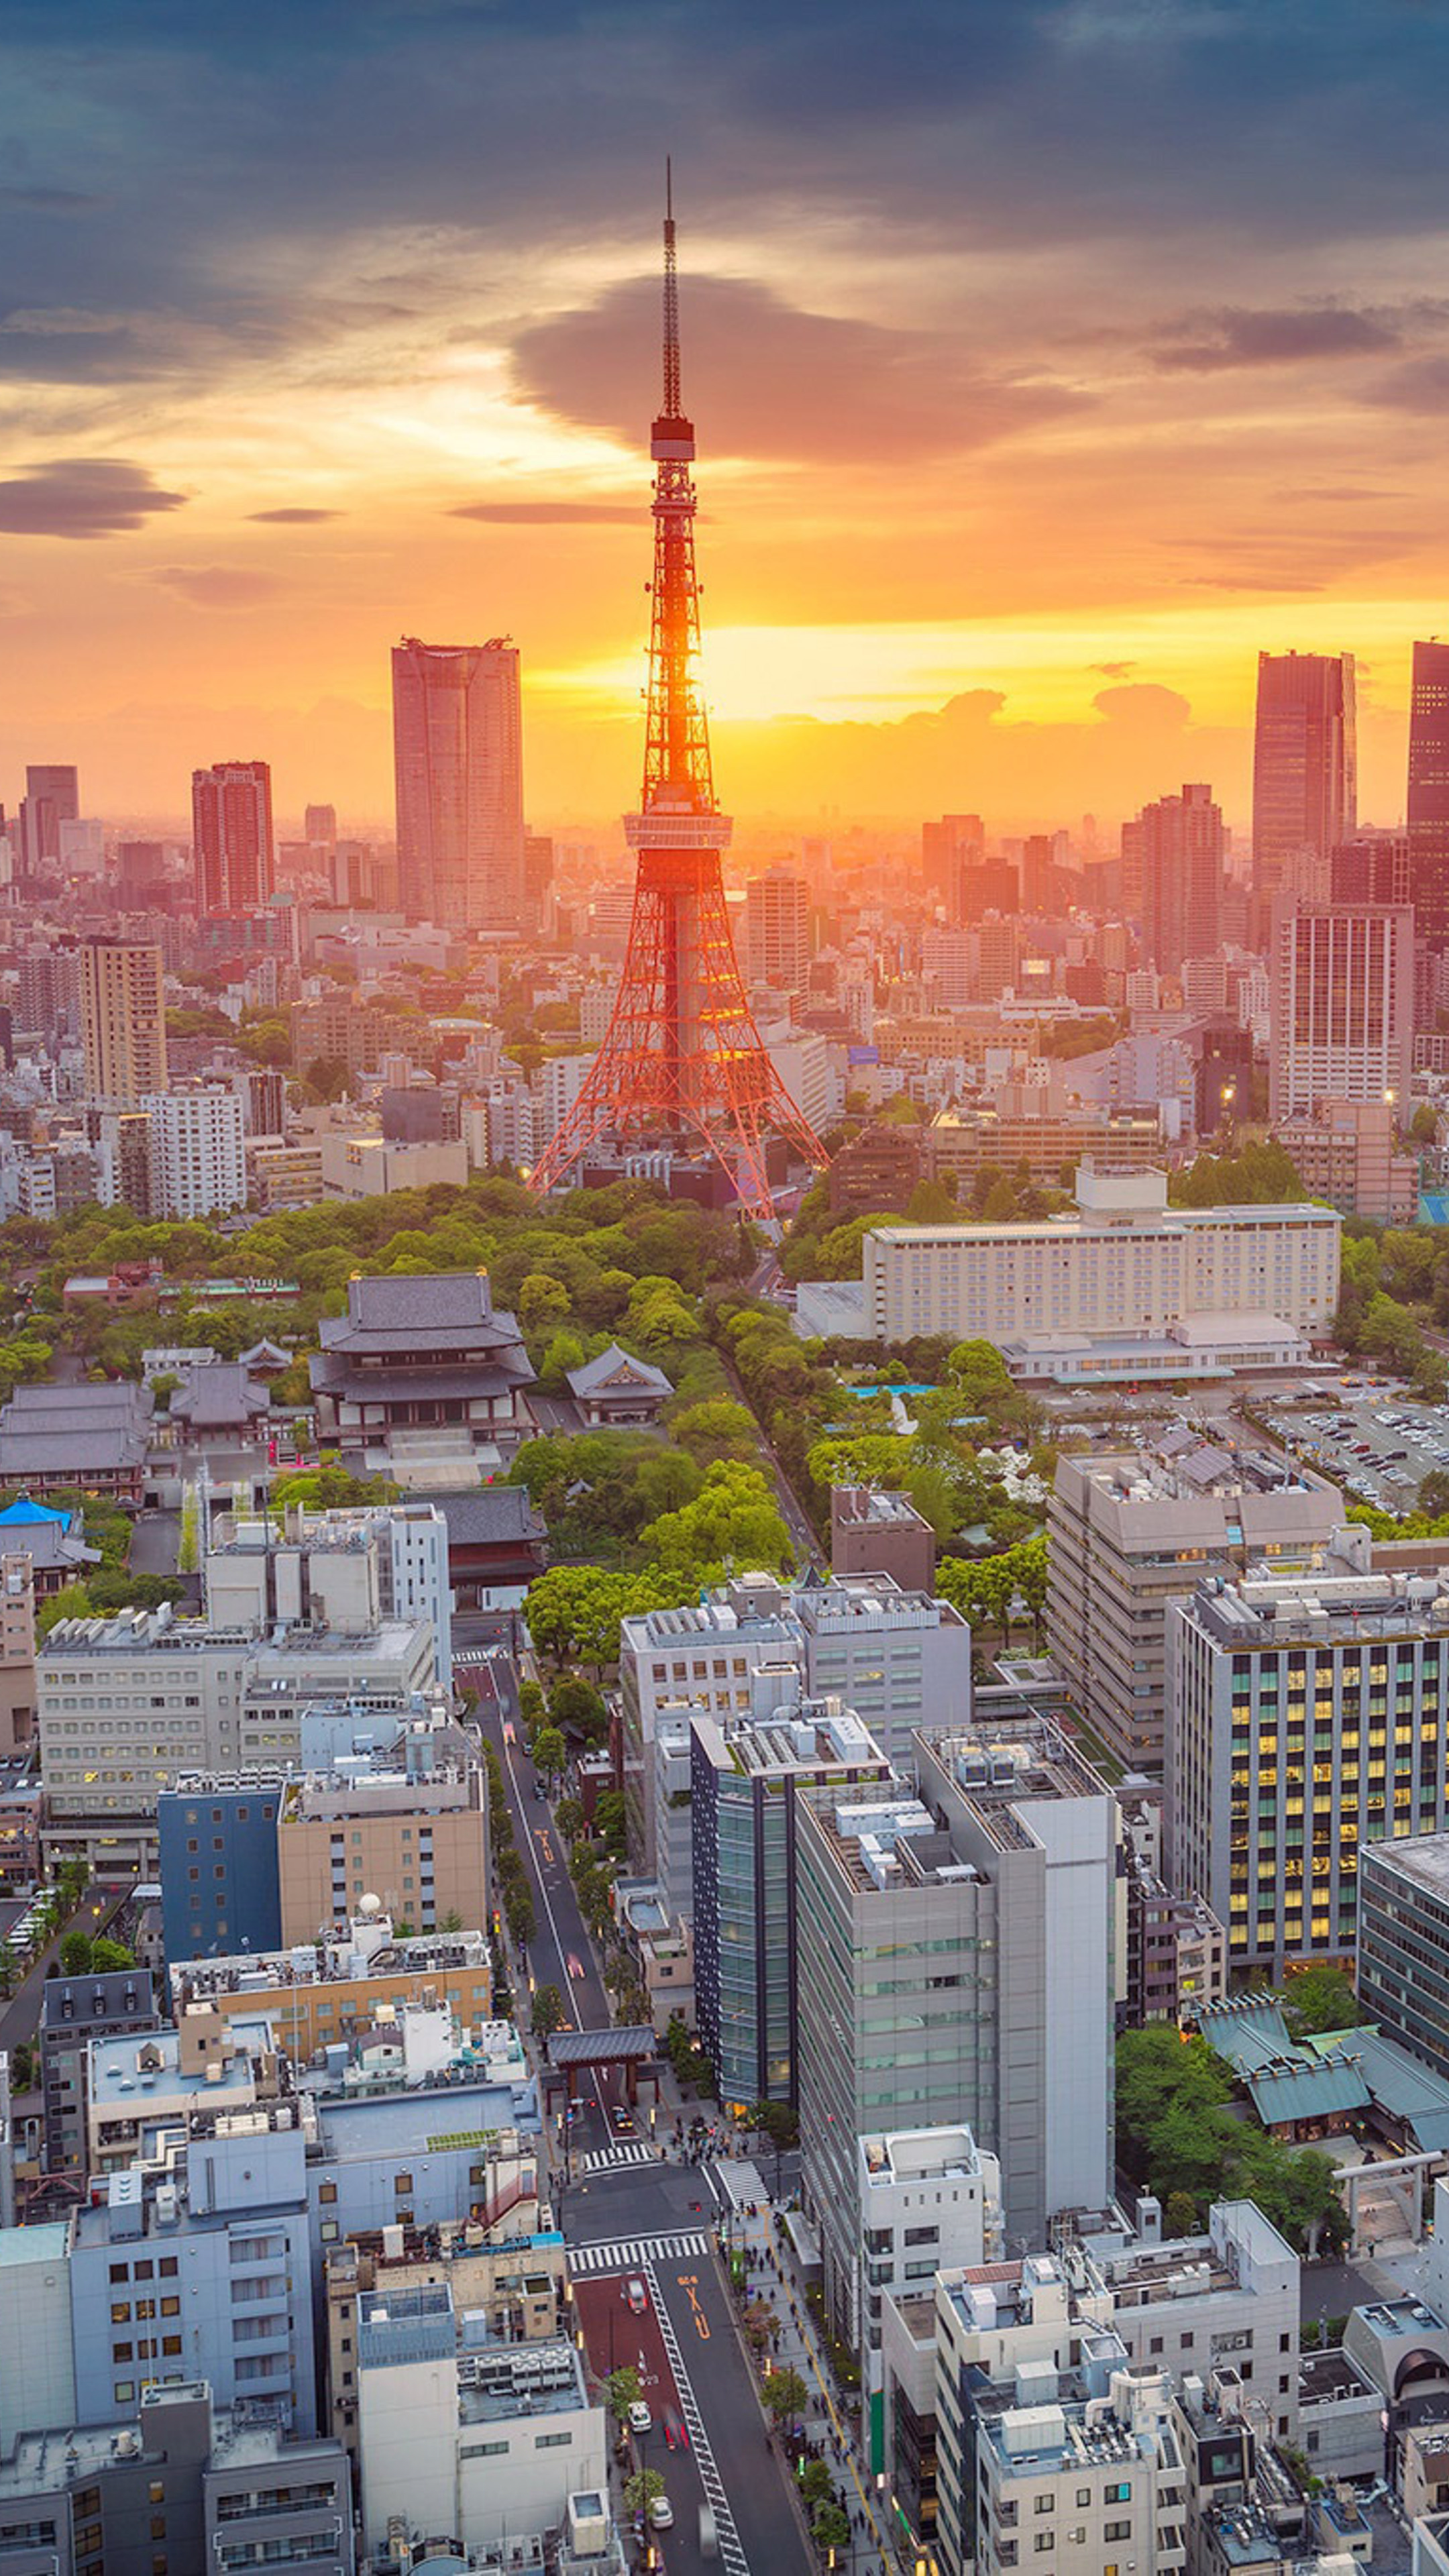 Tokyo Tower, Morning serenity, Xperia smartphone wallpaper, 4K imagery, 2160x3840 4K Handy